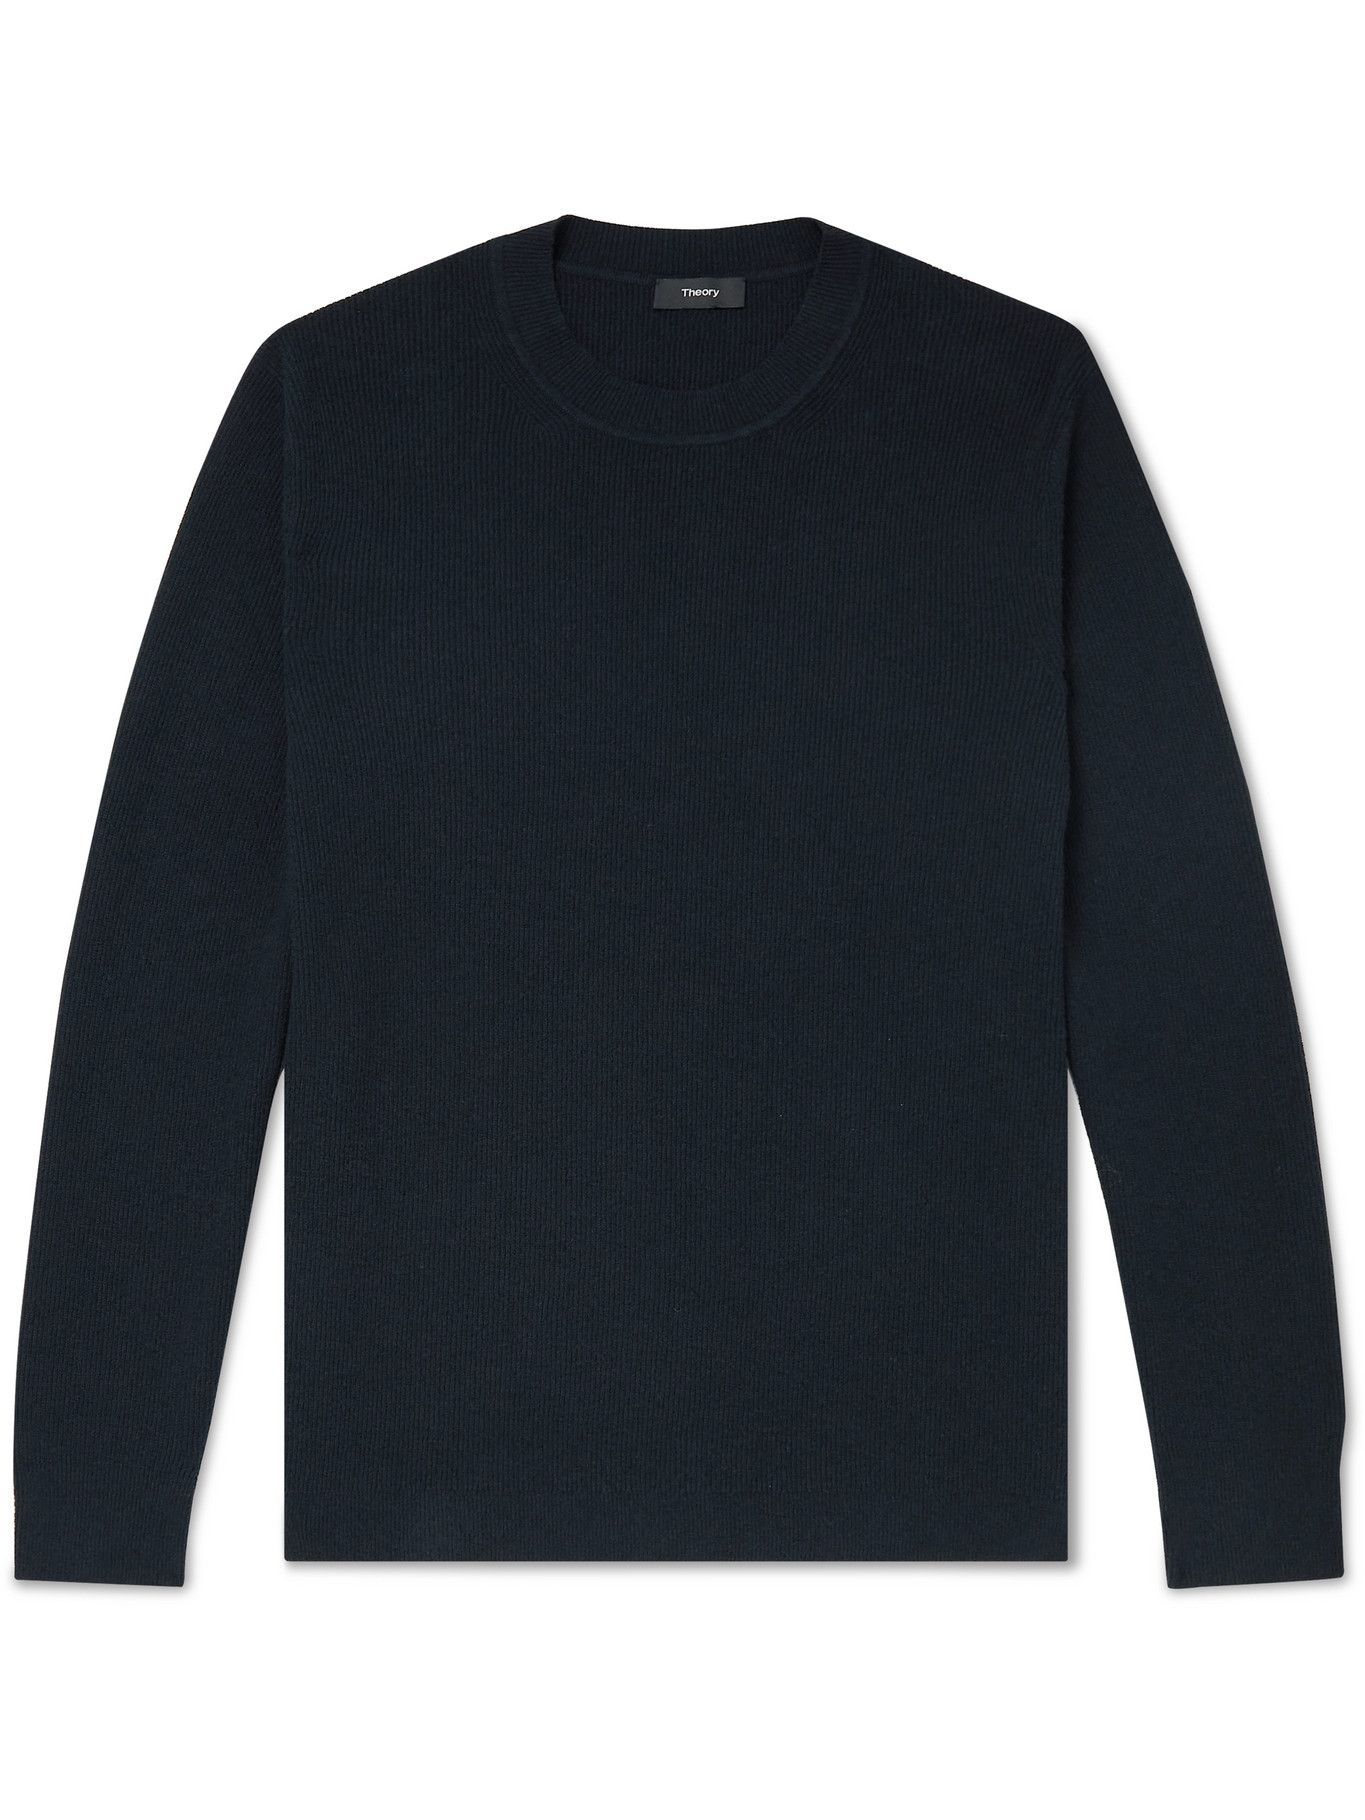 Theory - Dariel Ribbed Cotton-Blend Sweater - Black Theory